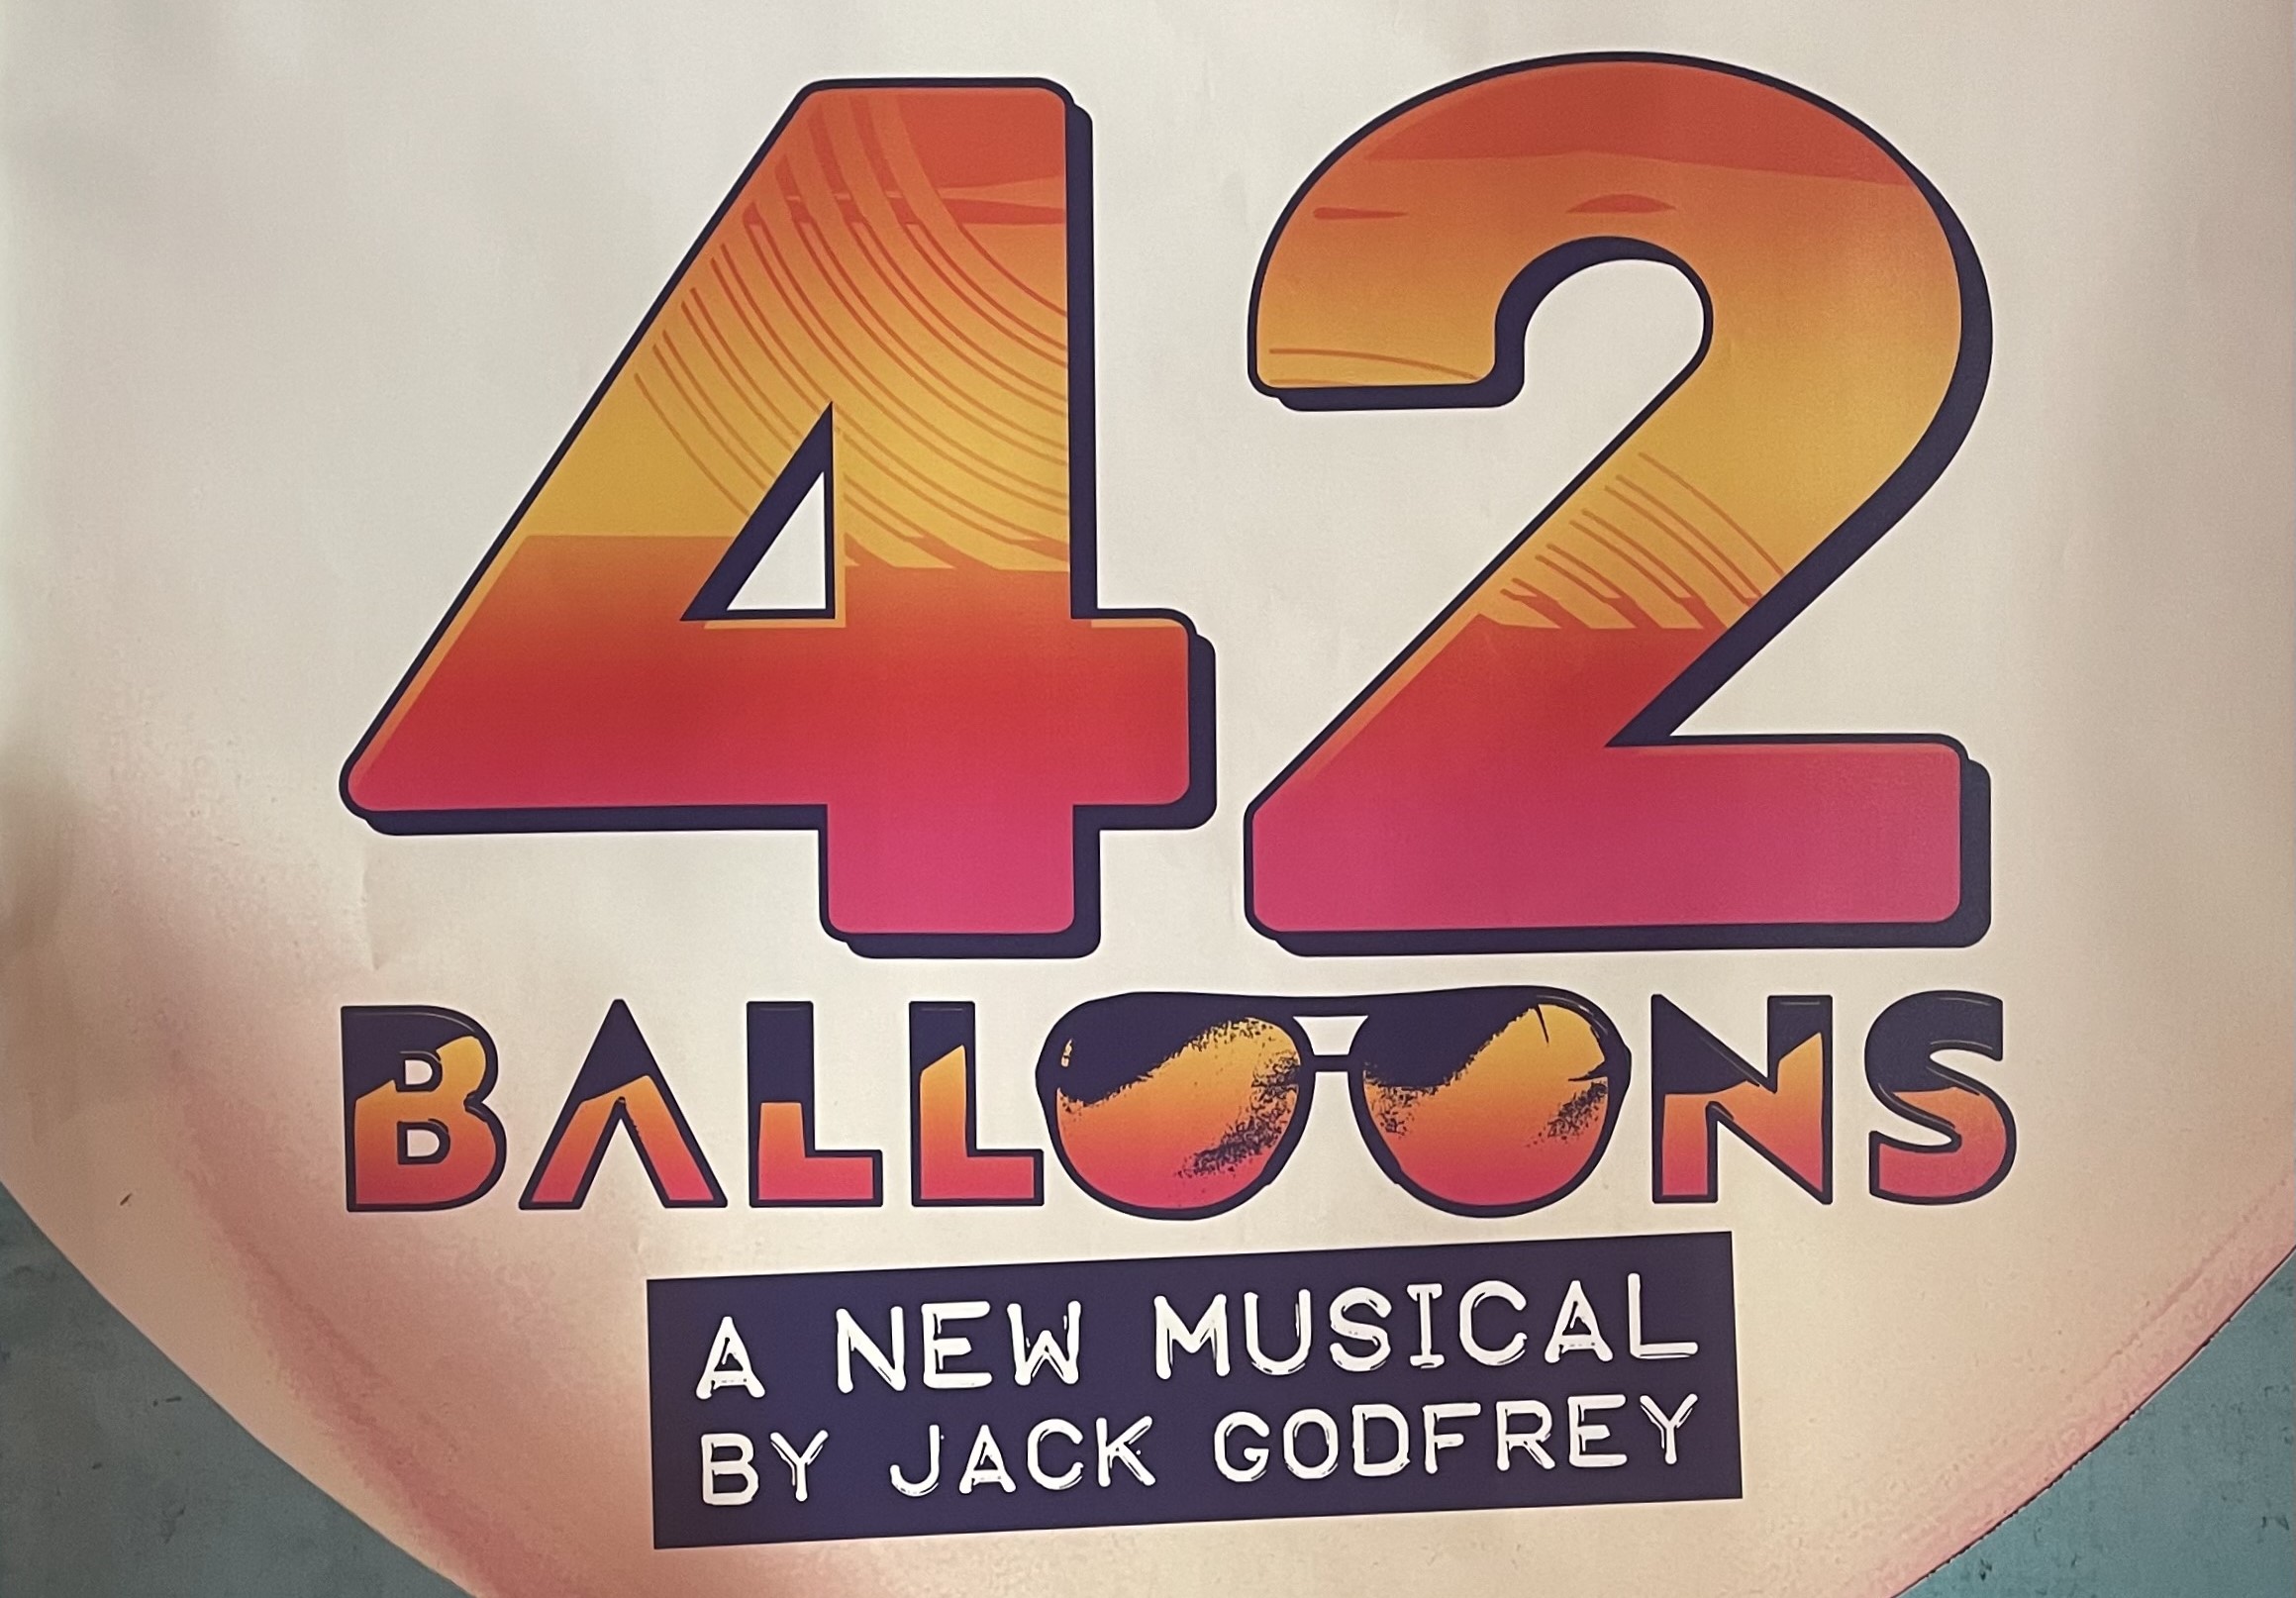 Have you seen the musical “42 Balloons” ?